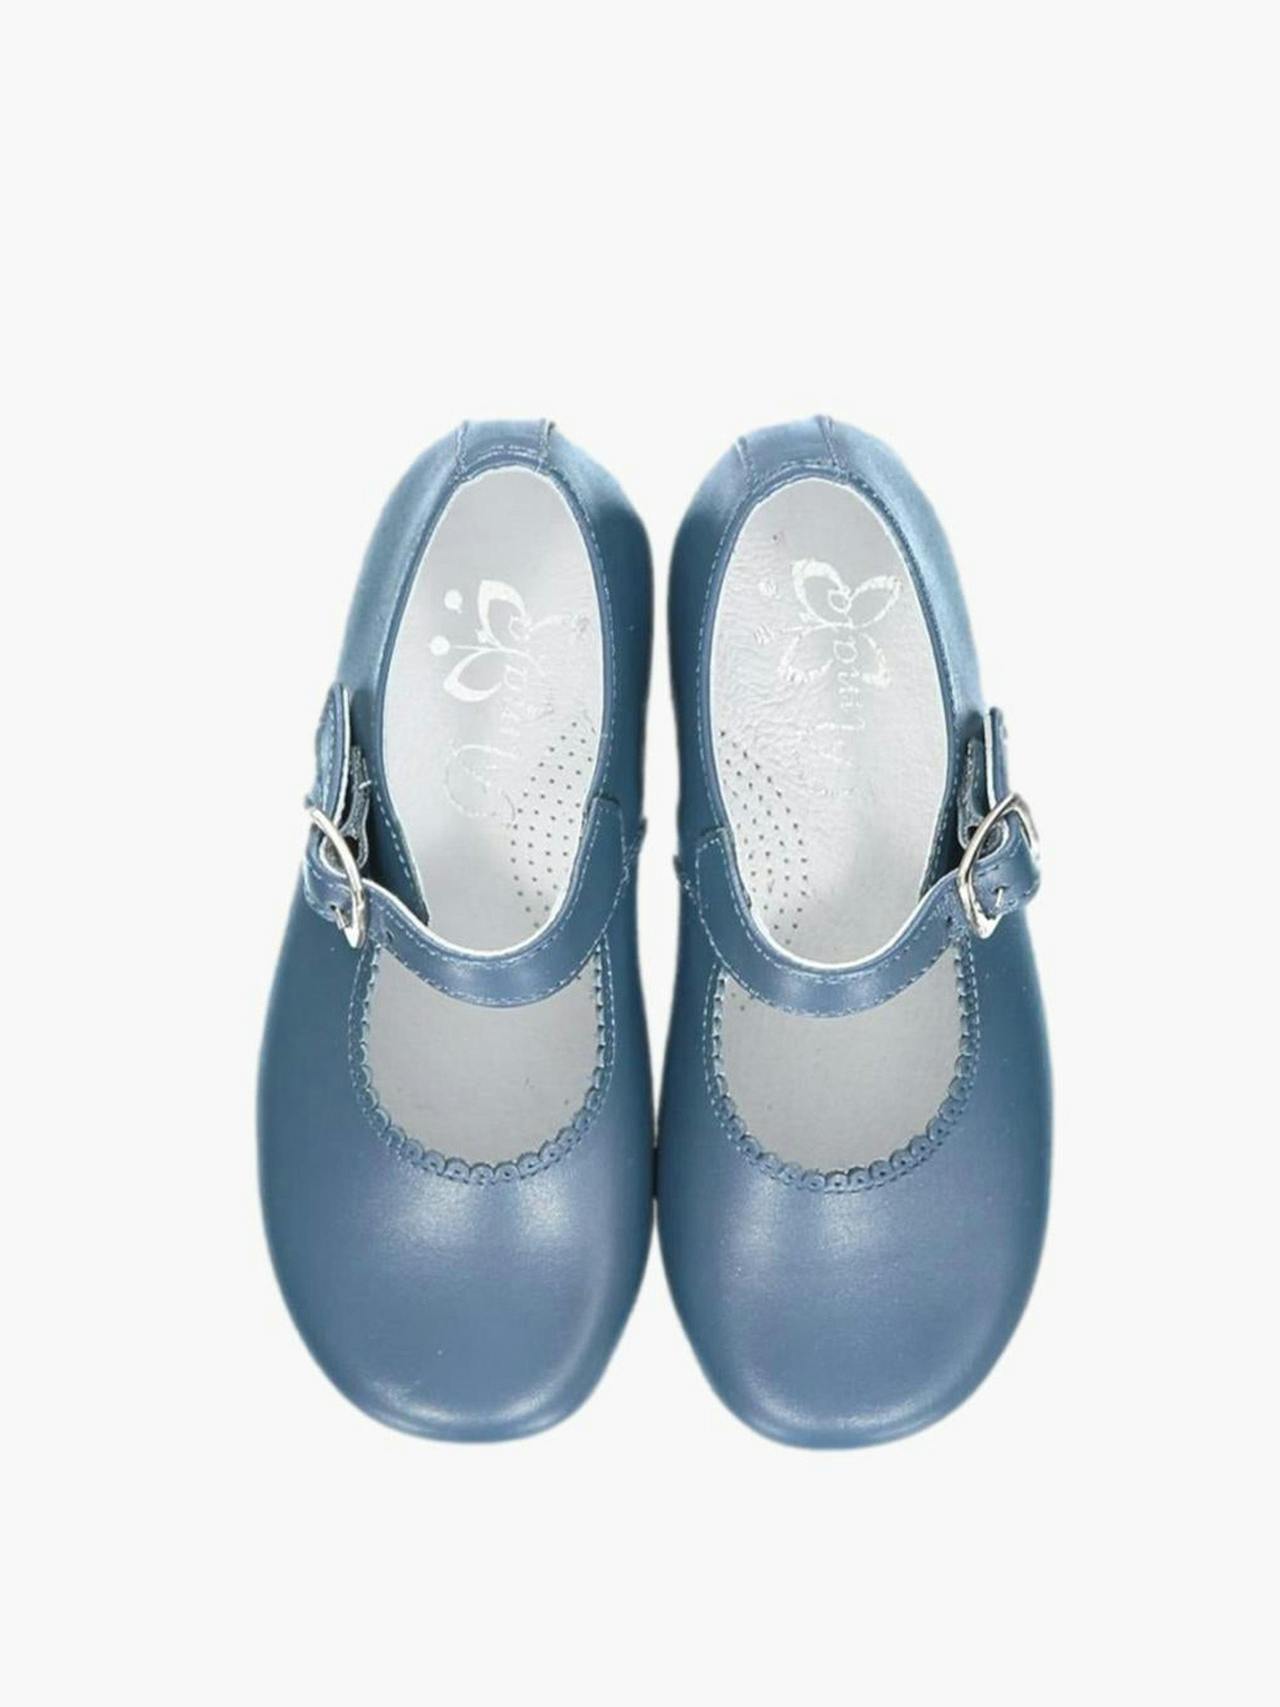 Blue Mary Jane girl shoes